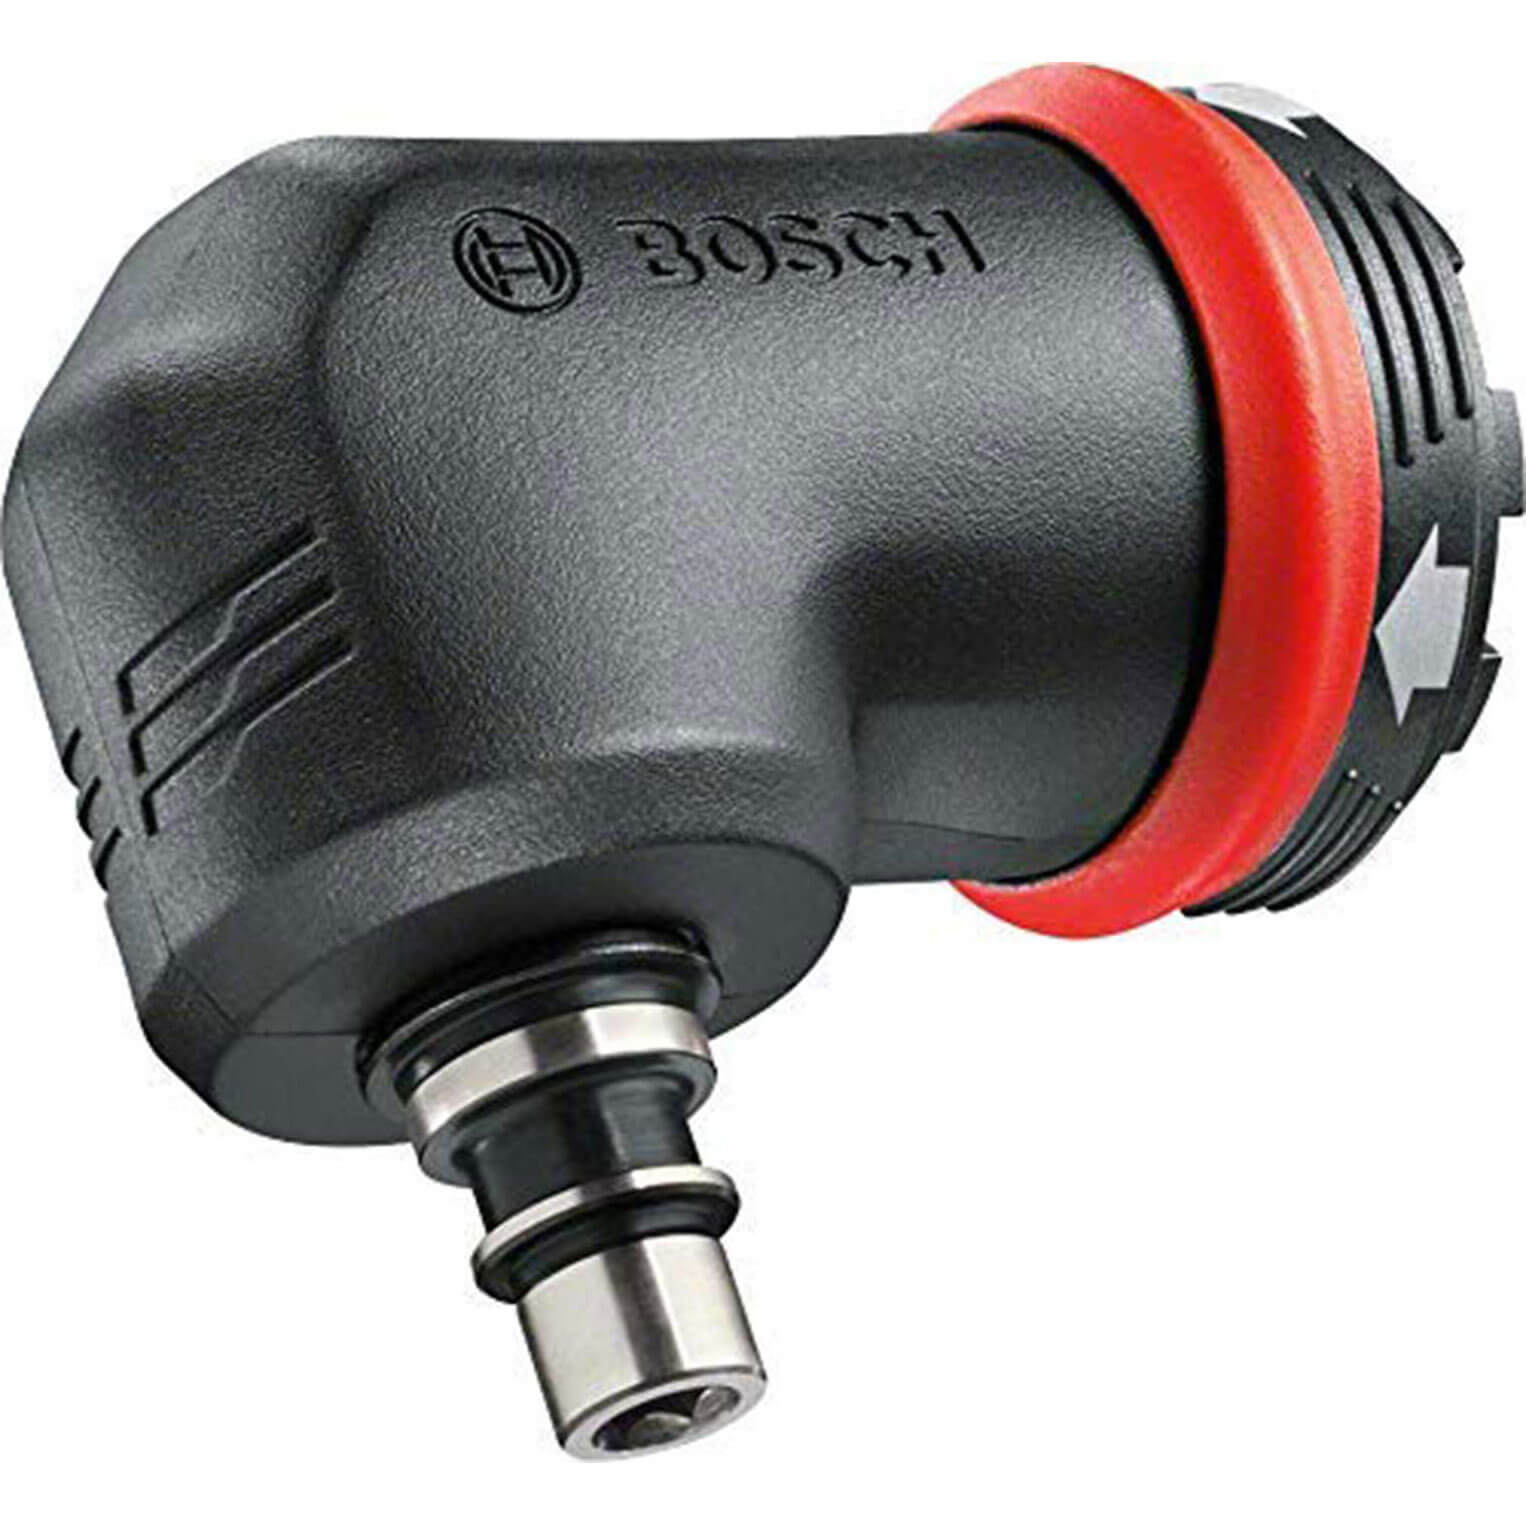 Image of Bosch Angled Screwdriver Adapter for ADVANCEDDRILL/IMPACT 18